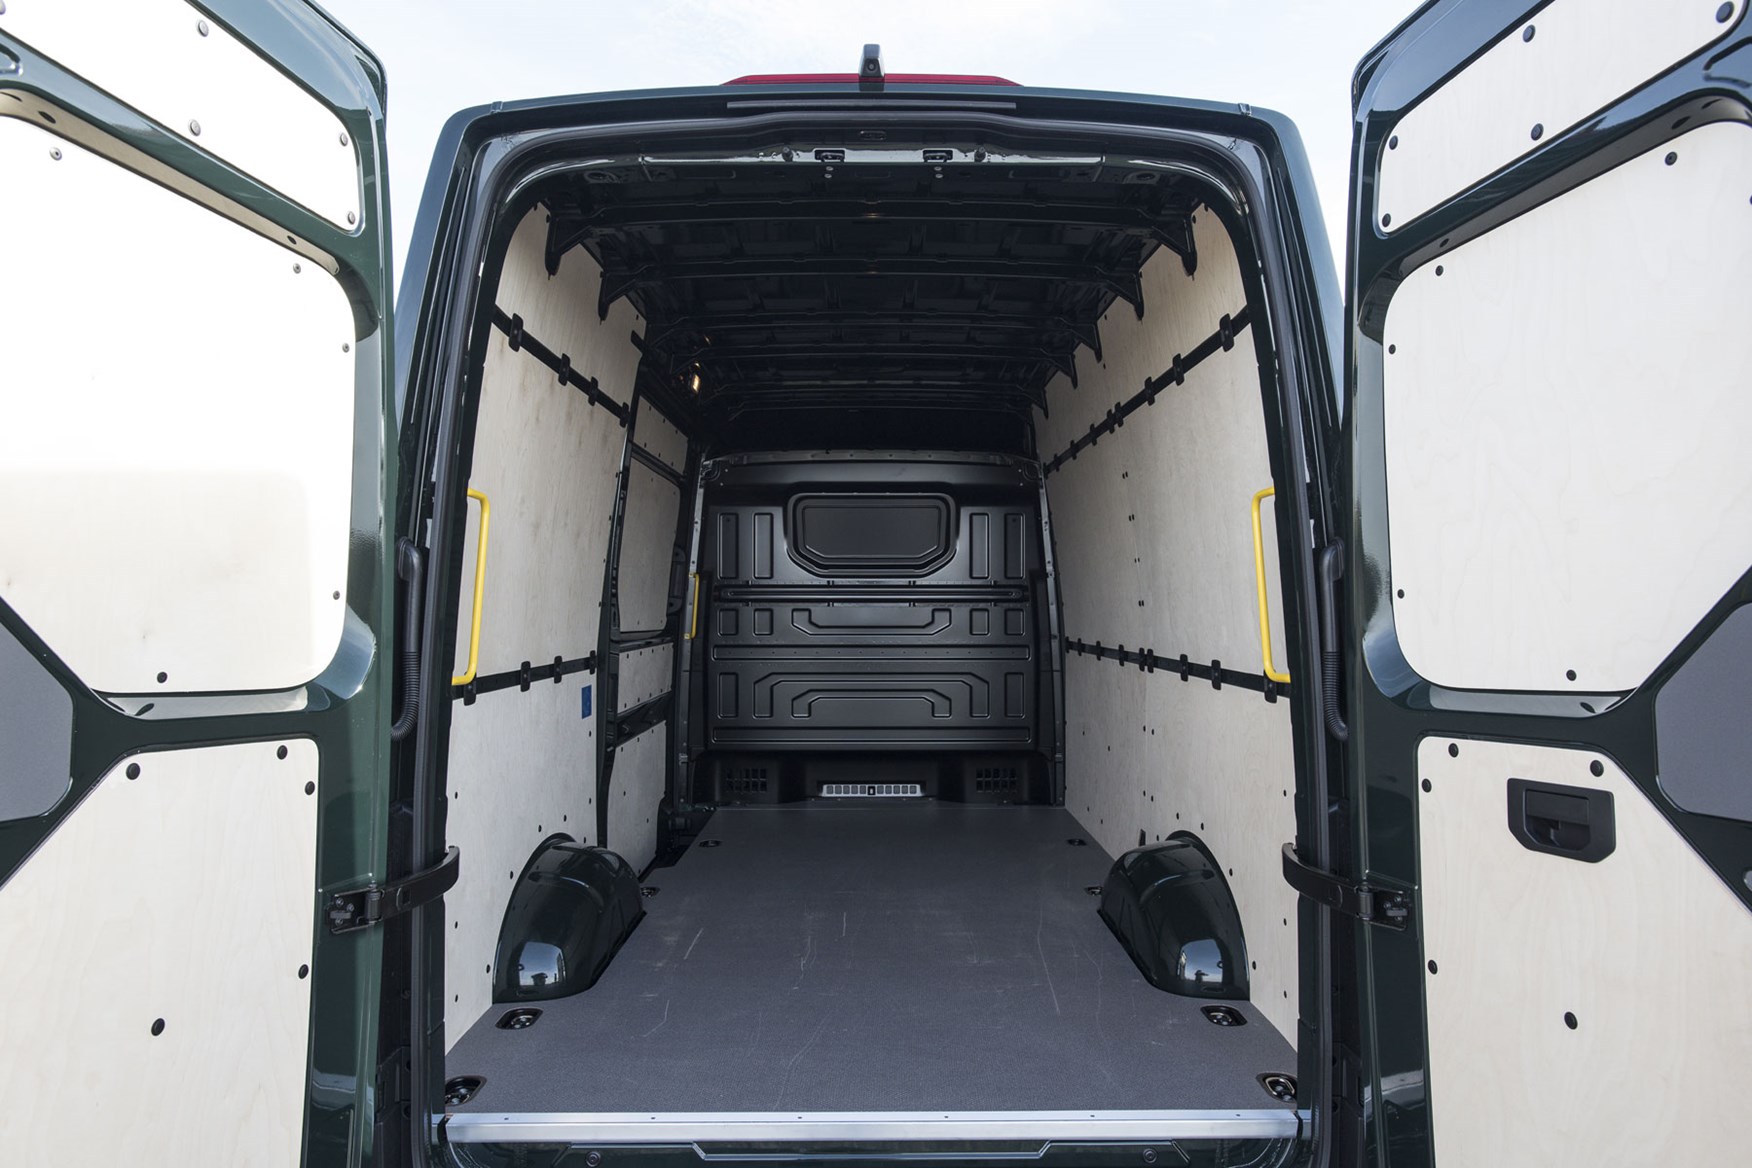 VW Crafter 4Motion review - load area